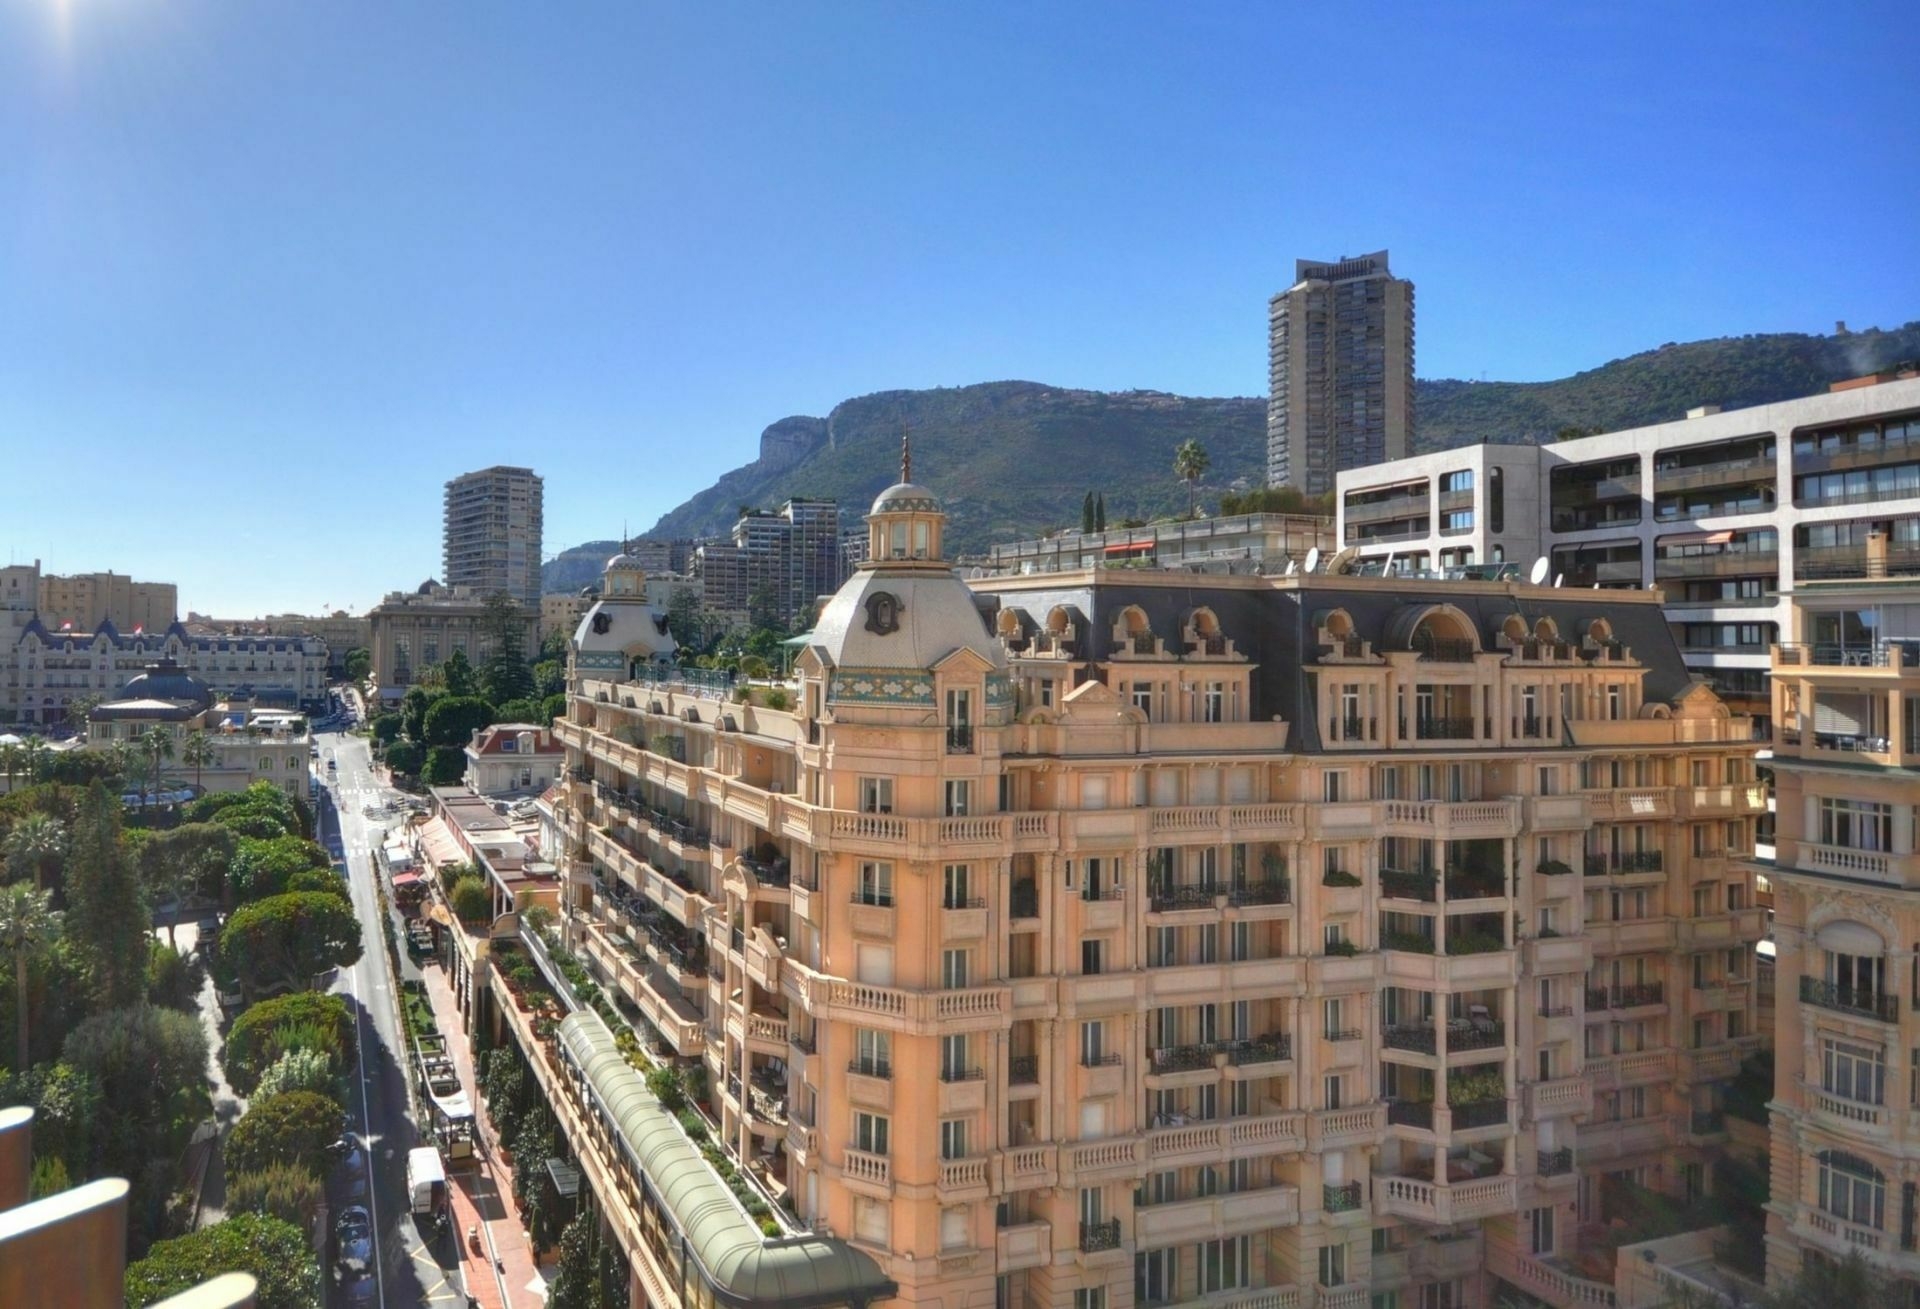 IDEAL BANK OFFICES - Offices for sale in Monaco